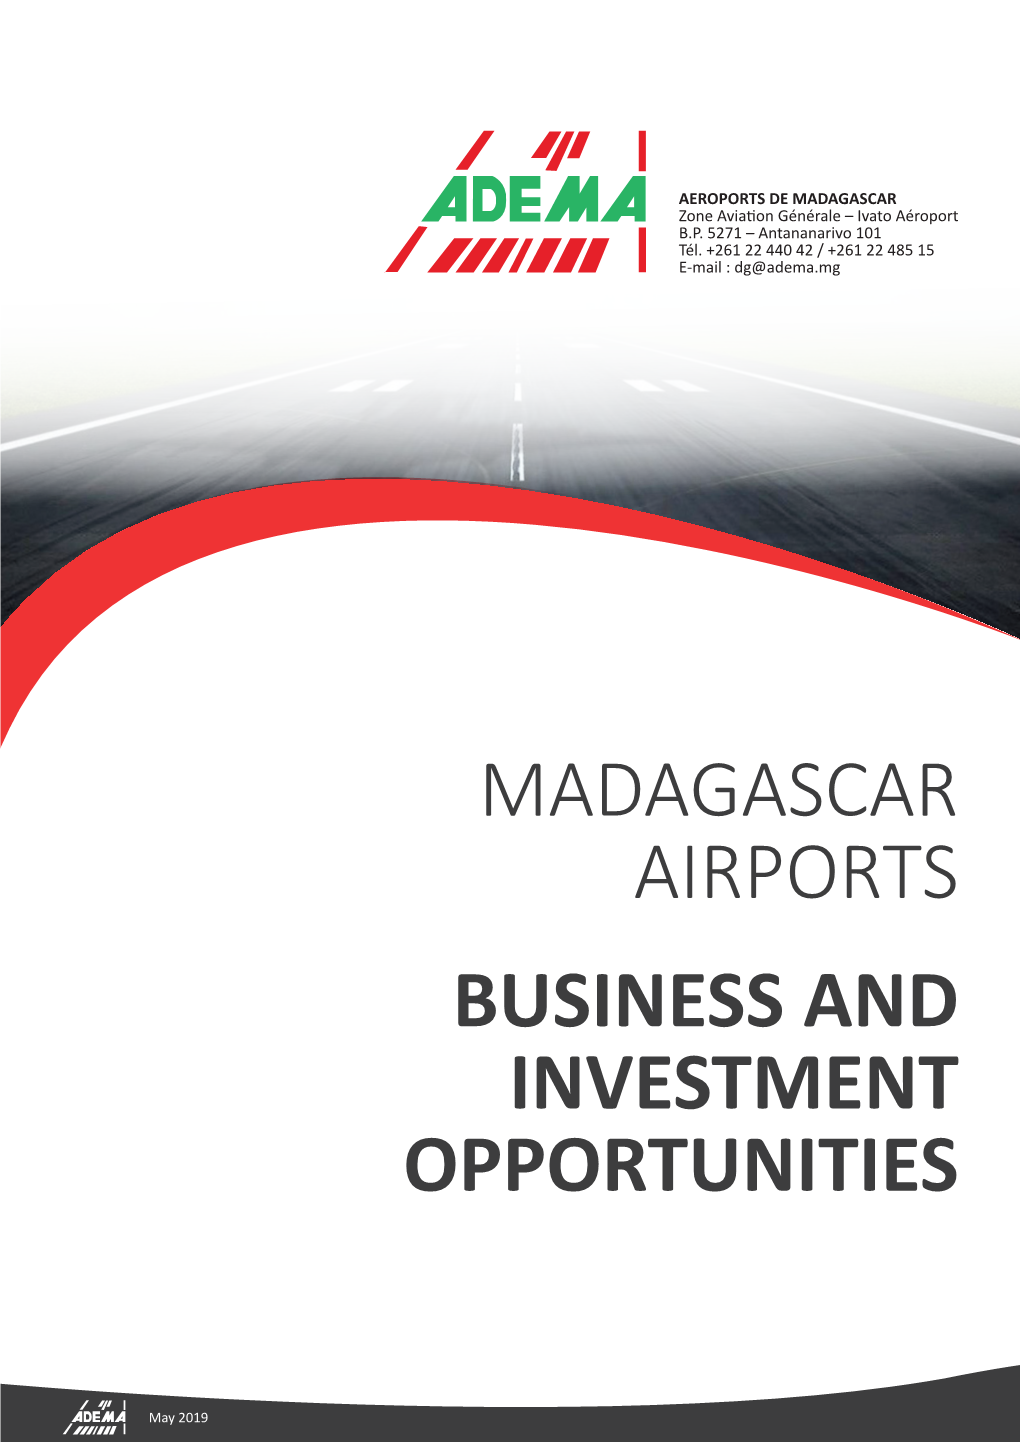 Madagascar Airports Business and Investment Opportunities